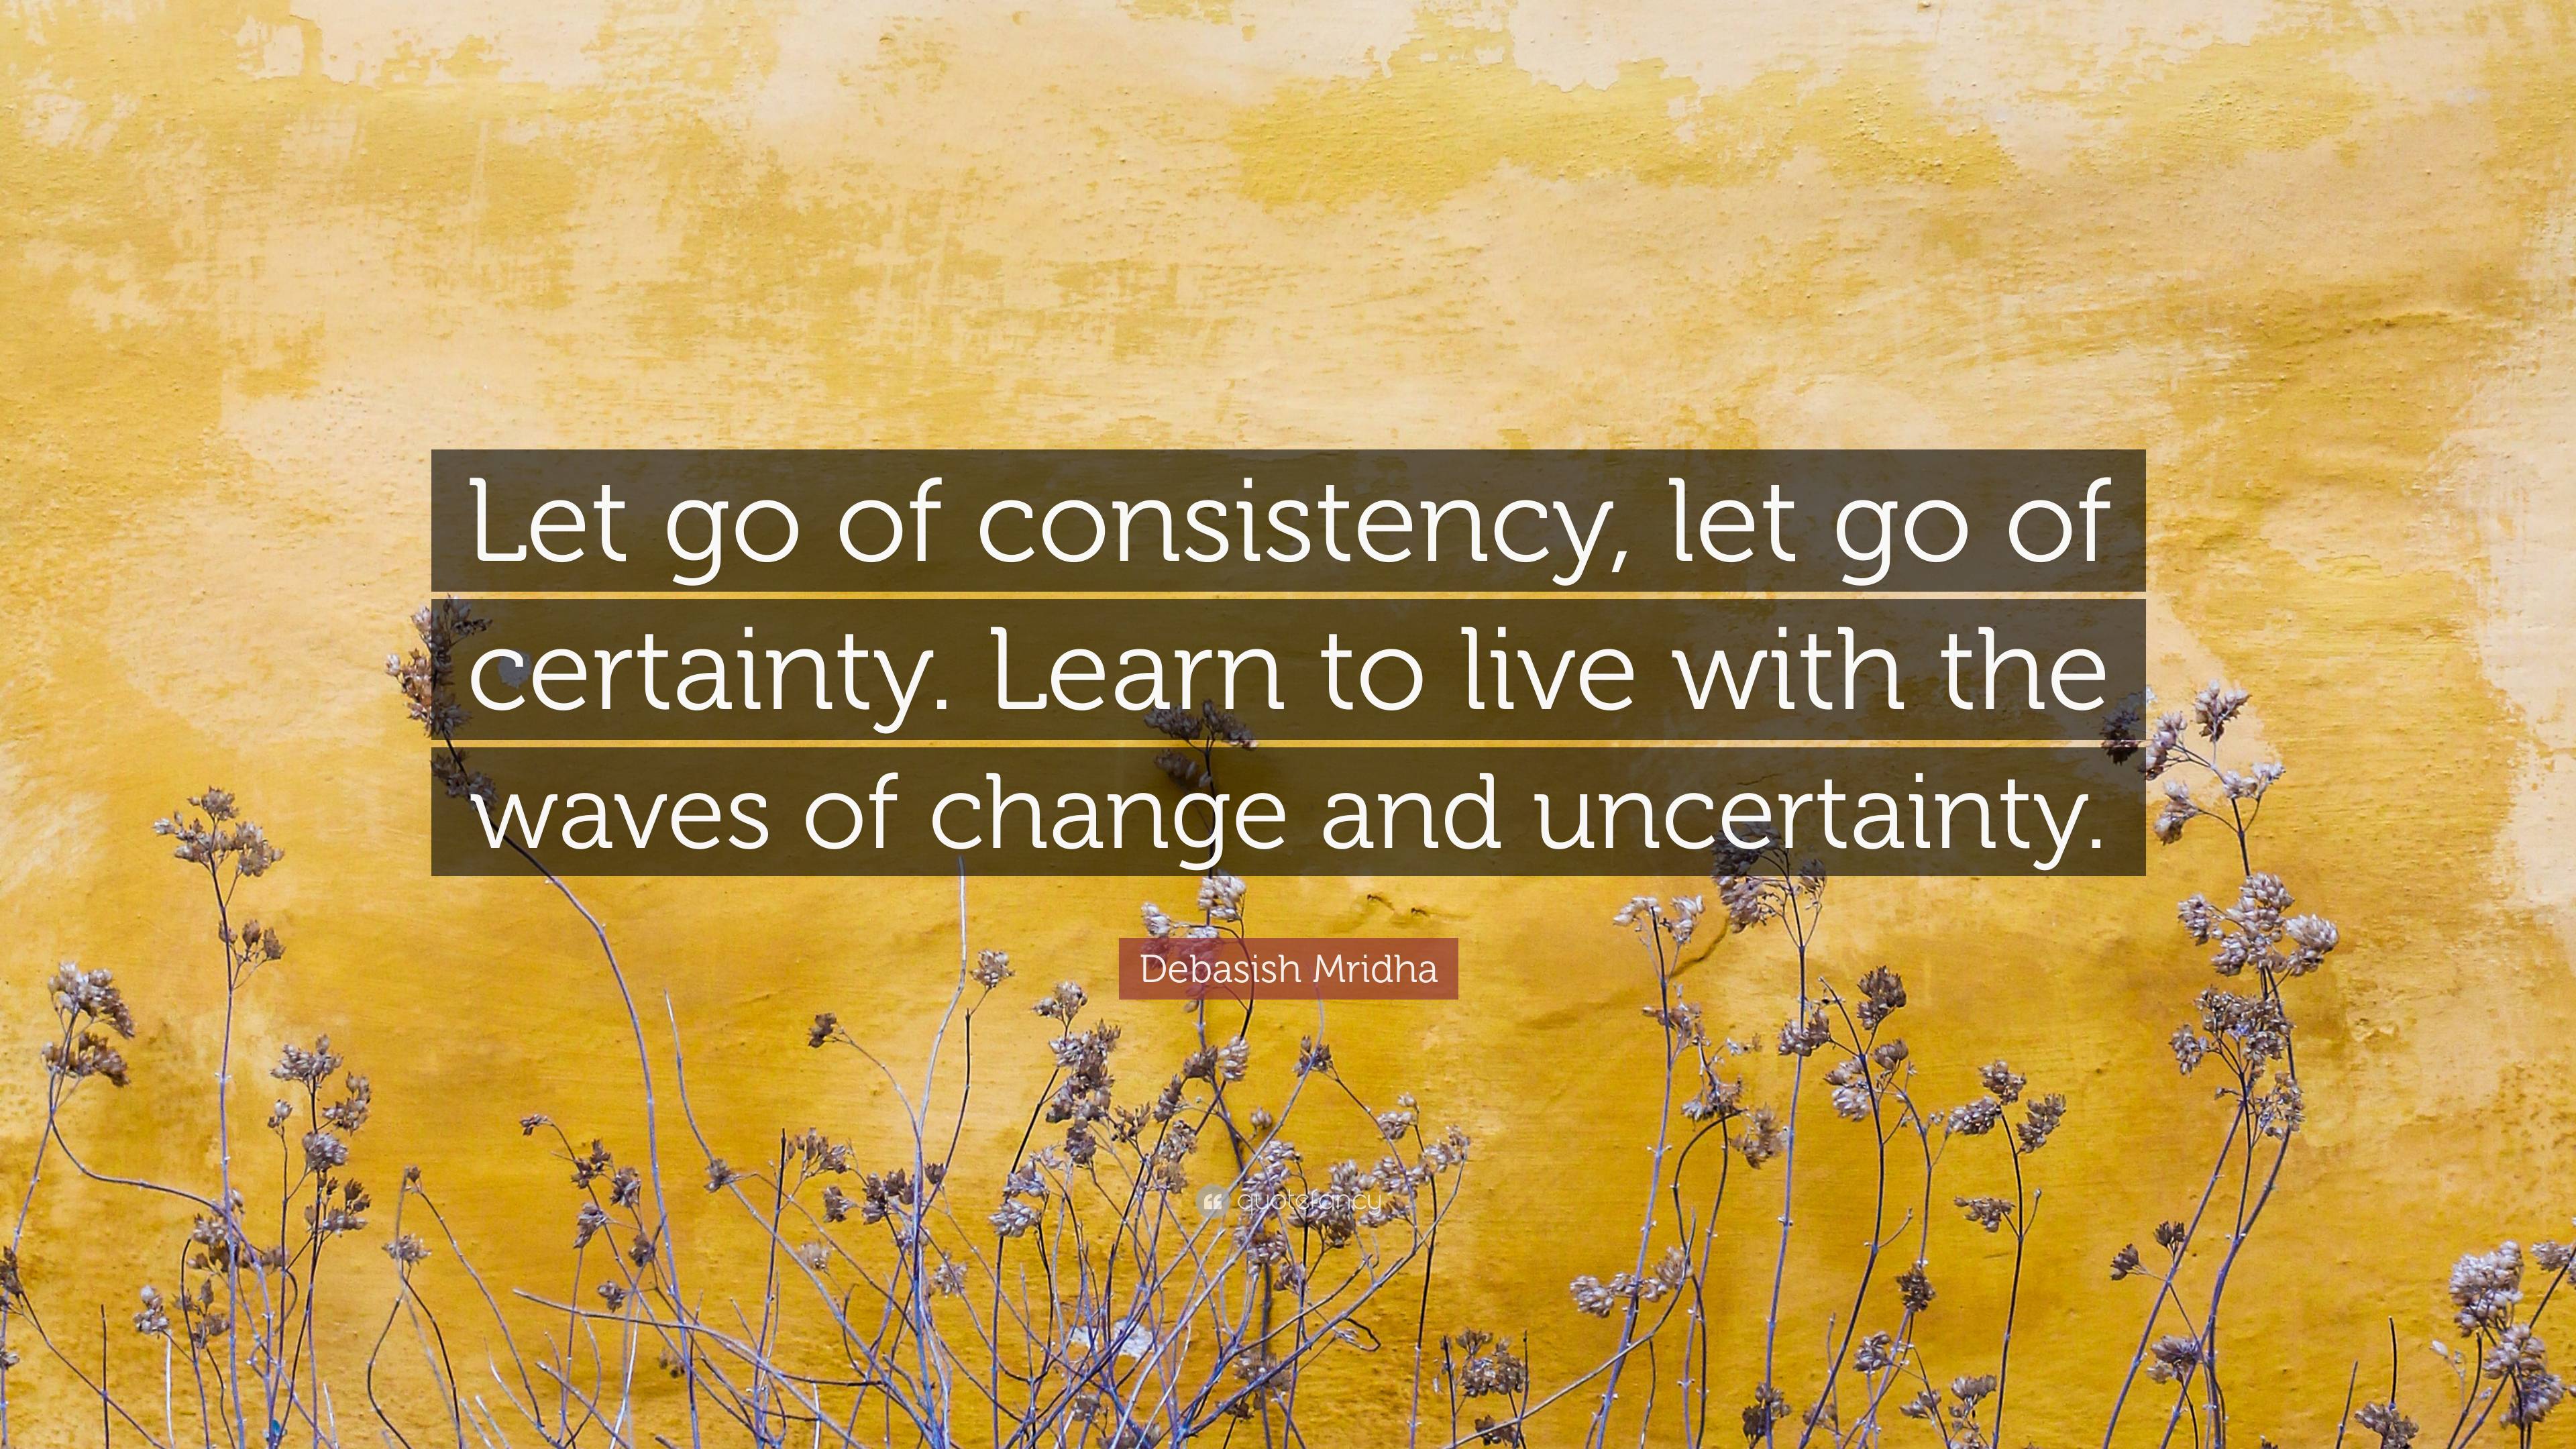 Debasish Mridha Quote: “Let go of consistency, let go of certainty ...